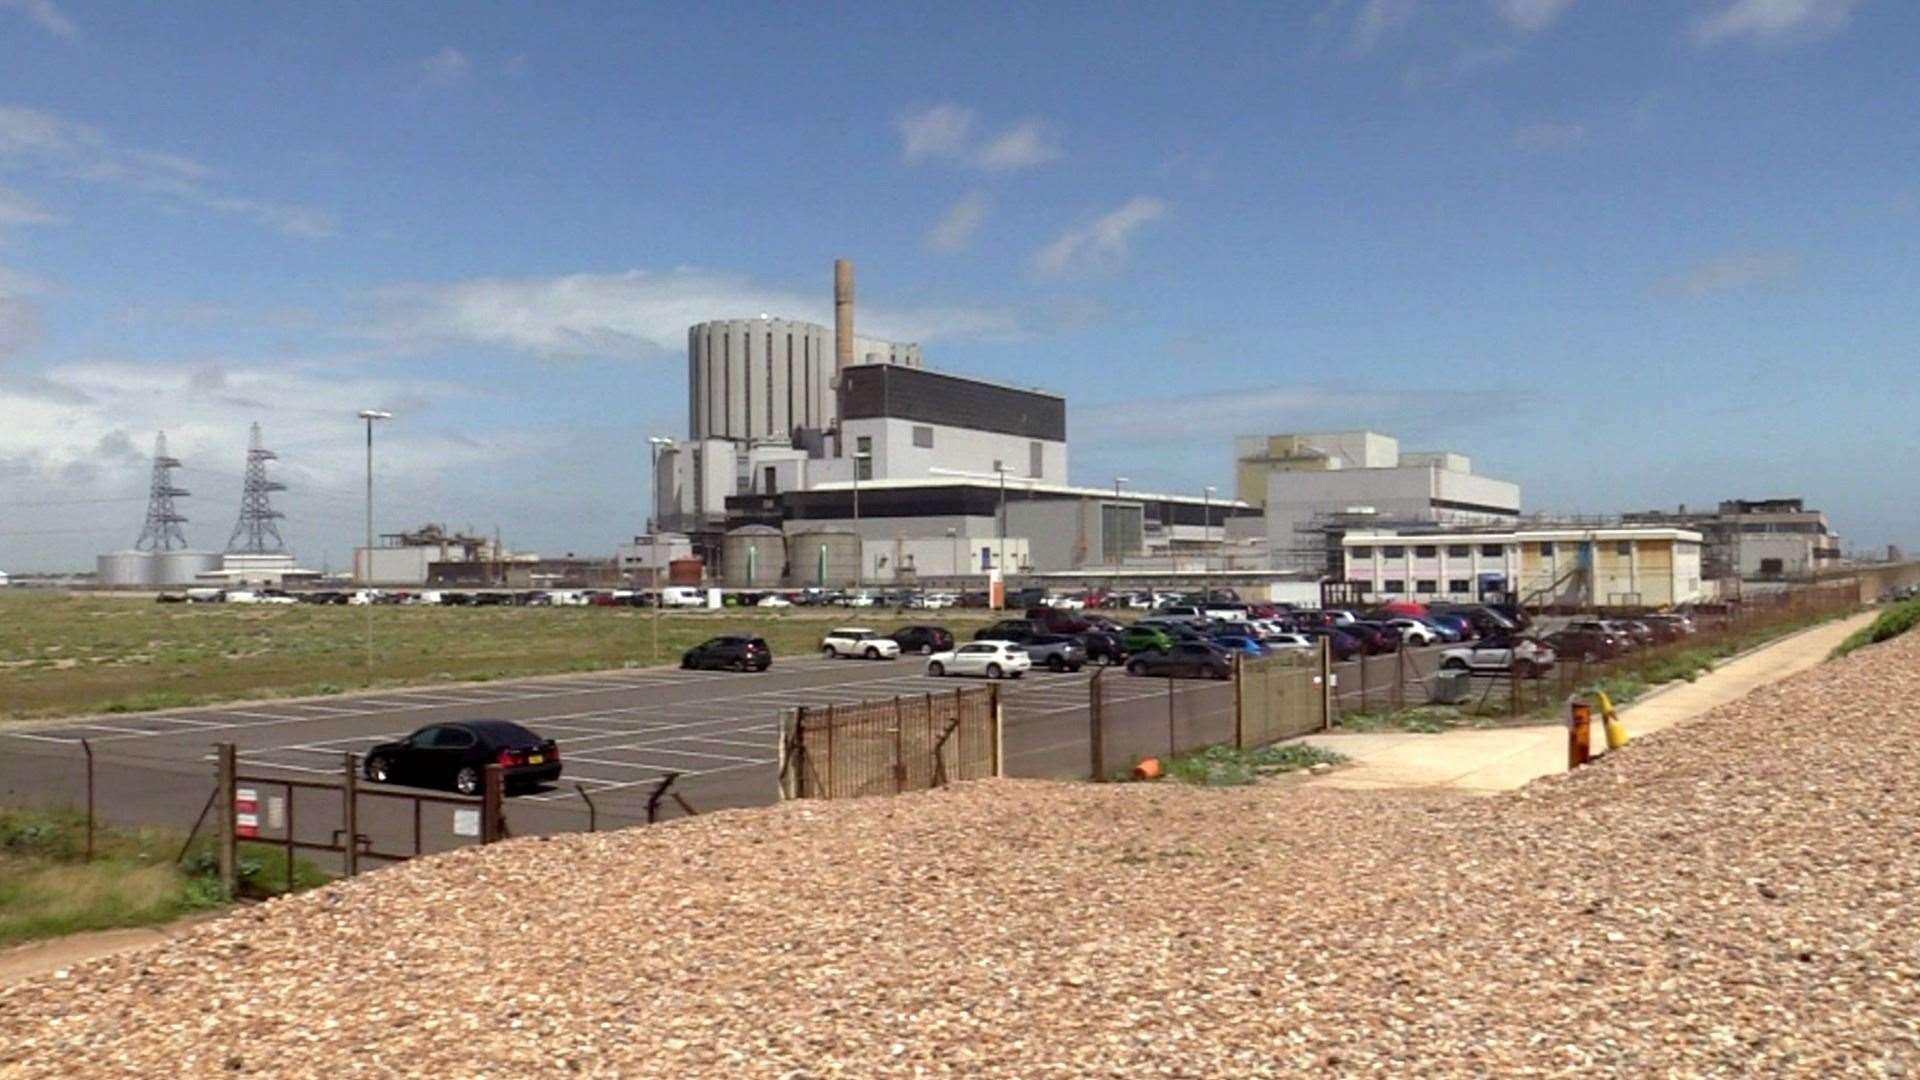 Dungeness B is in the defueling phase and is currently producing no nuclear energy. There are calls for SMRs to be installed on the land in the future